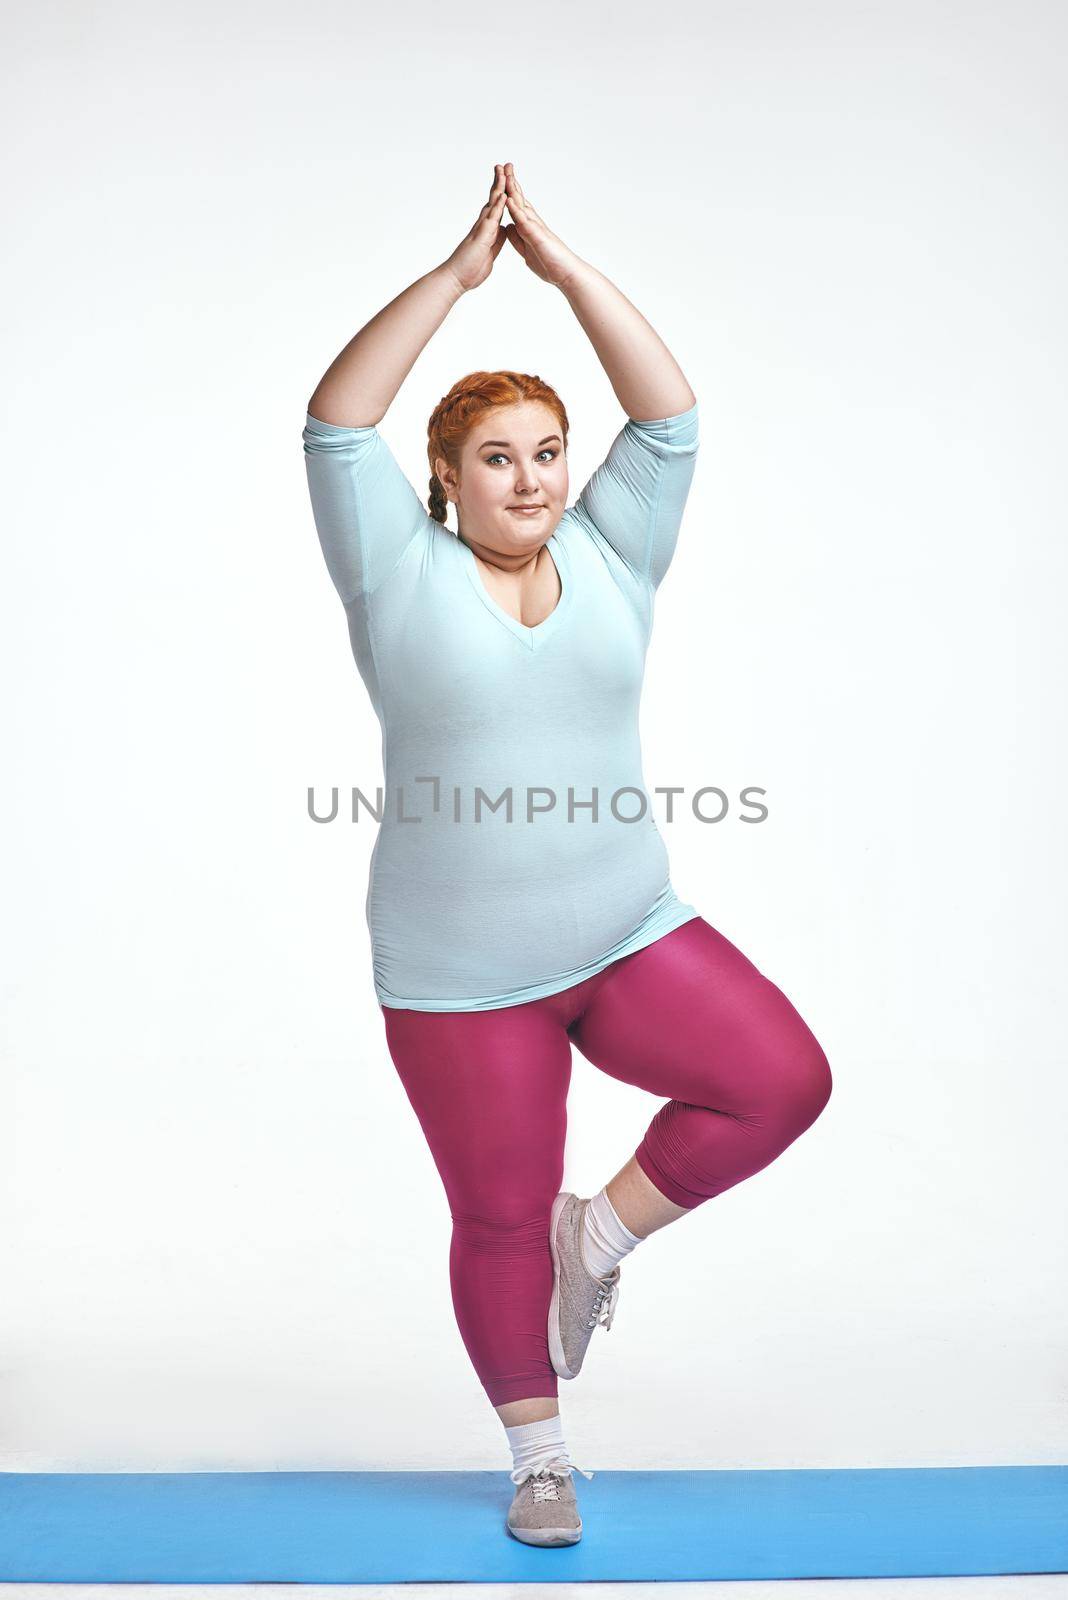 Amusing, red haired, chubby woman trains on the mat by friendsstock